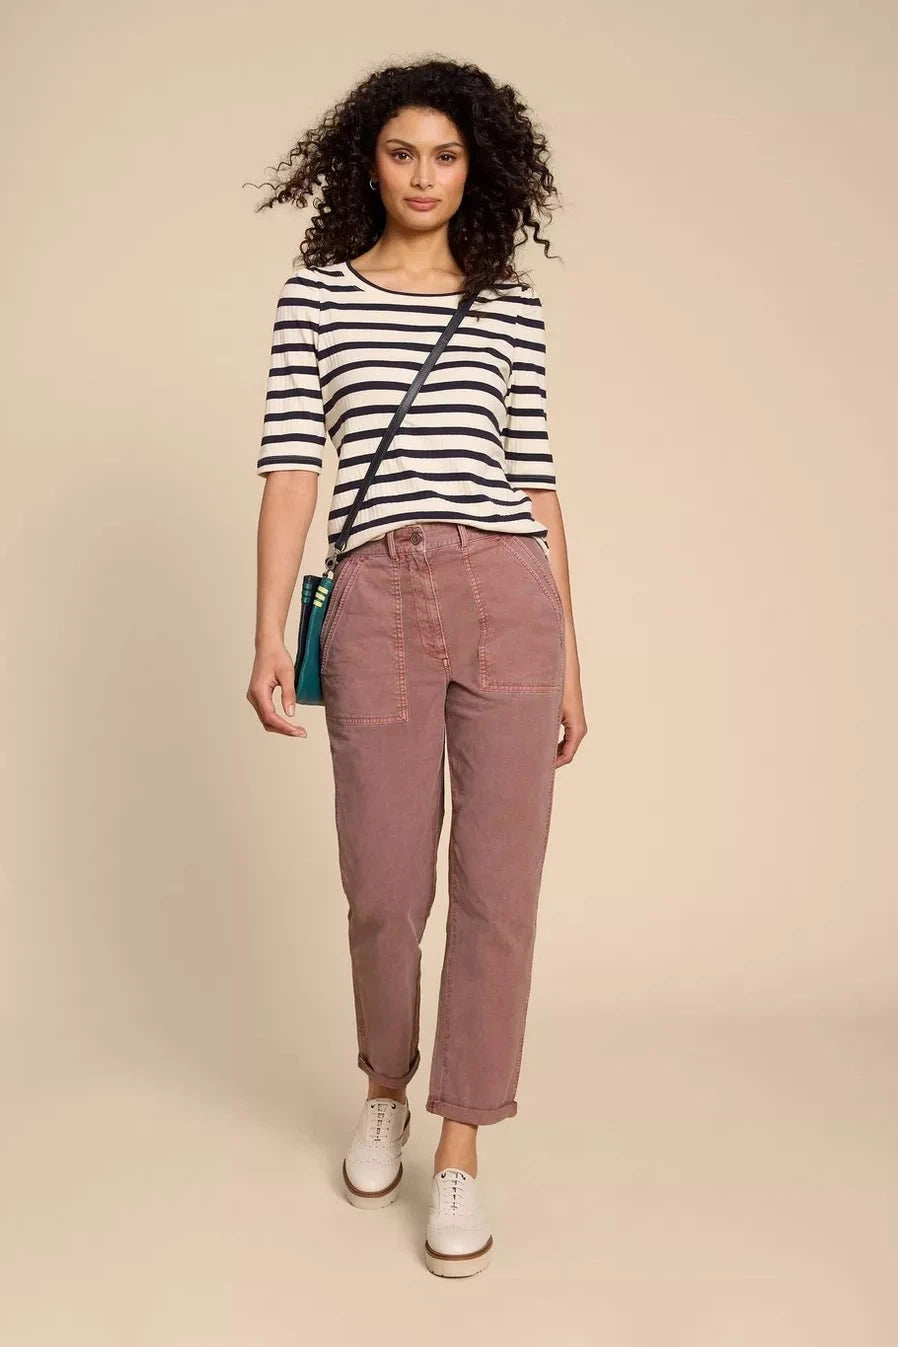 White Stuff Twister Organic Chino Trousers in Dusty Pink-Womens-Ohh! By Gum - Shop Sustainable